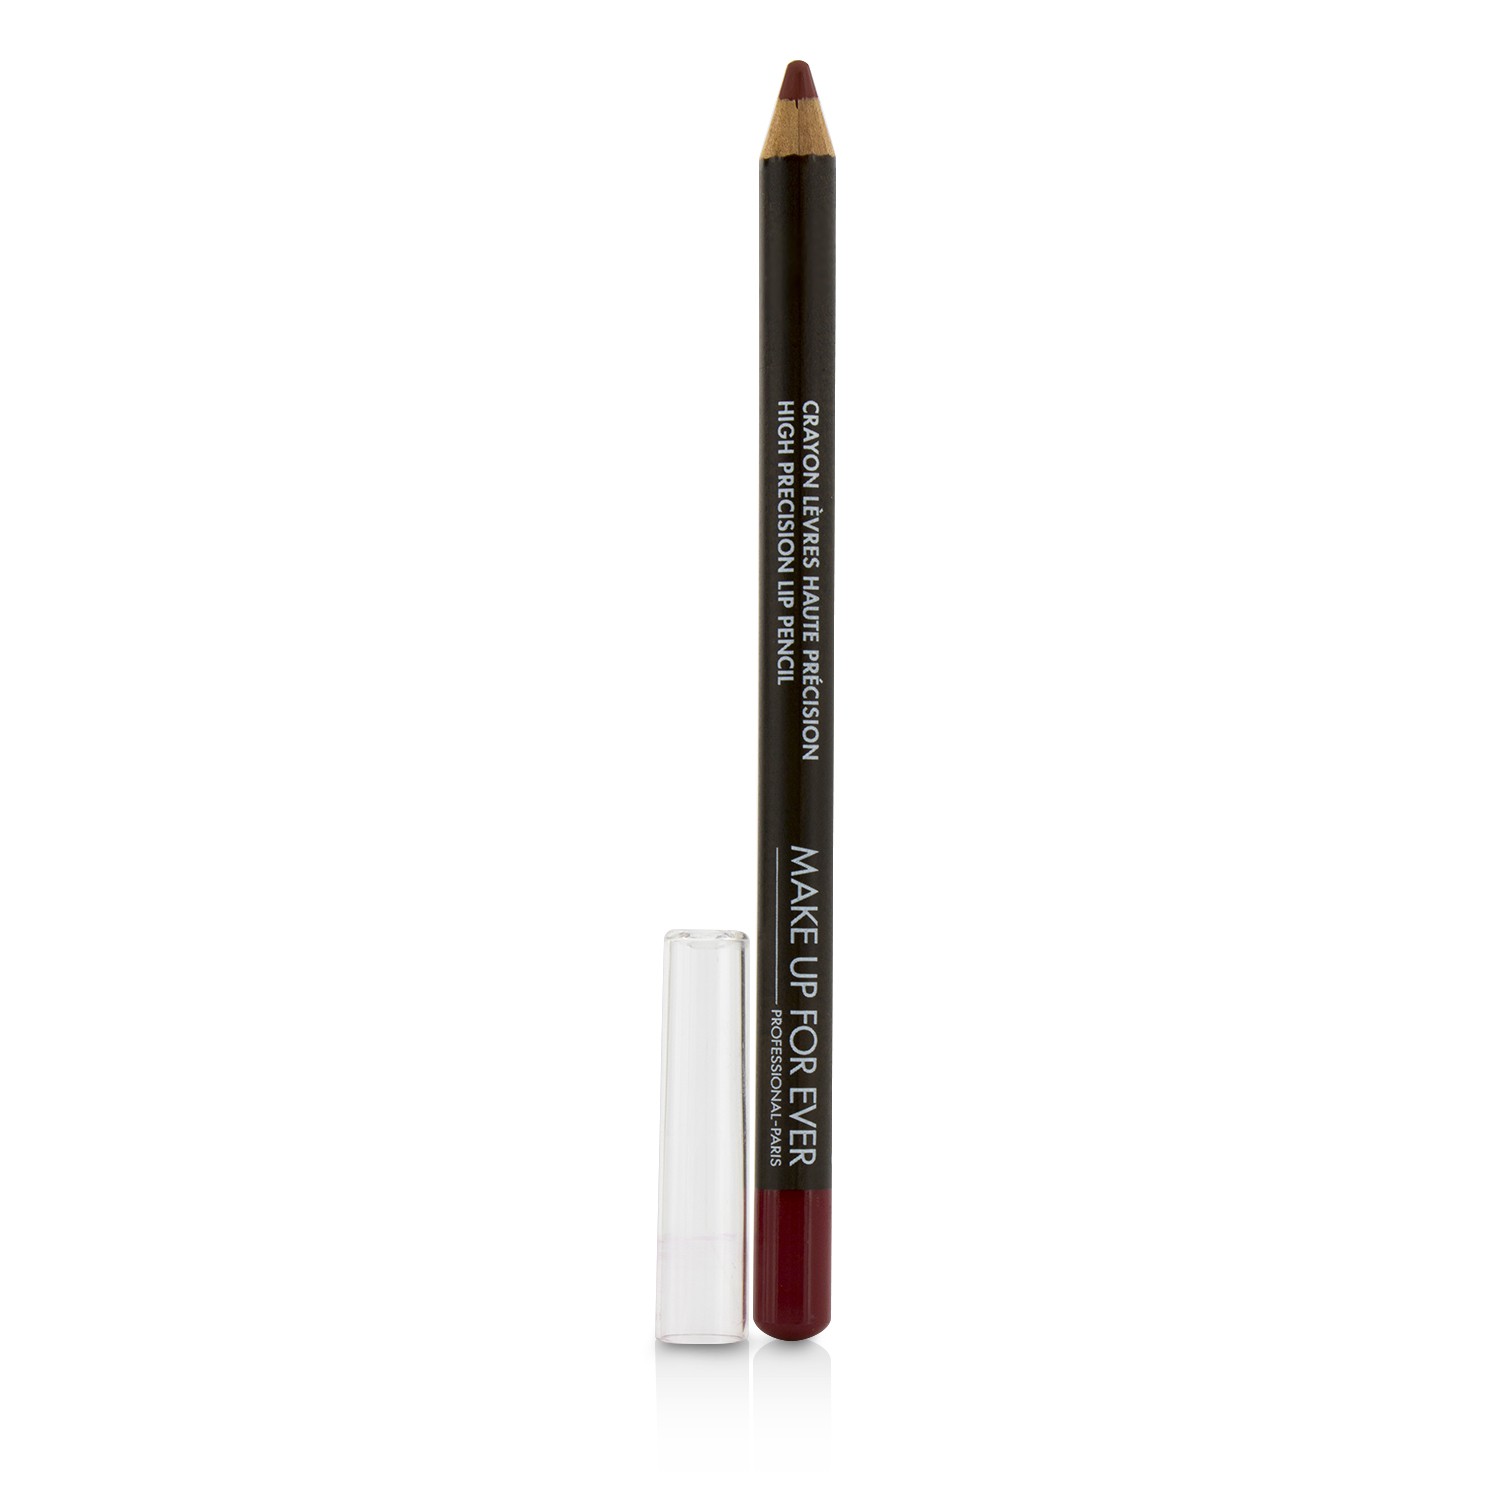 High Precision Lip Pencil - # 40 (Dark Brown) Make Up For Ever Image